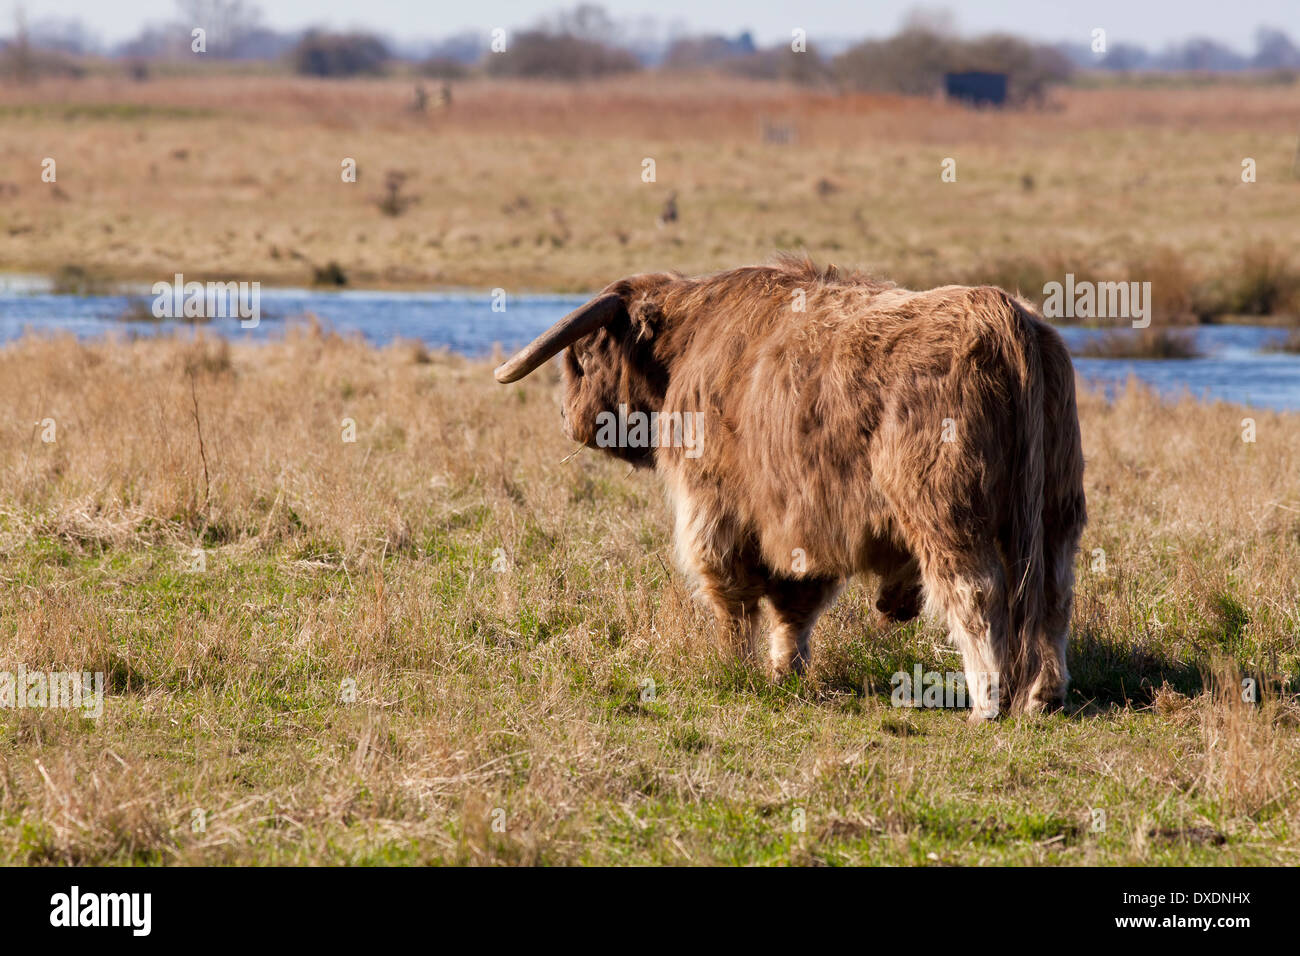 Highland cow standing in field Stock Photo